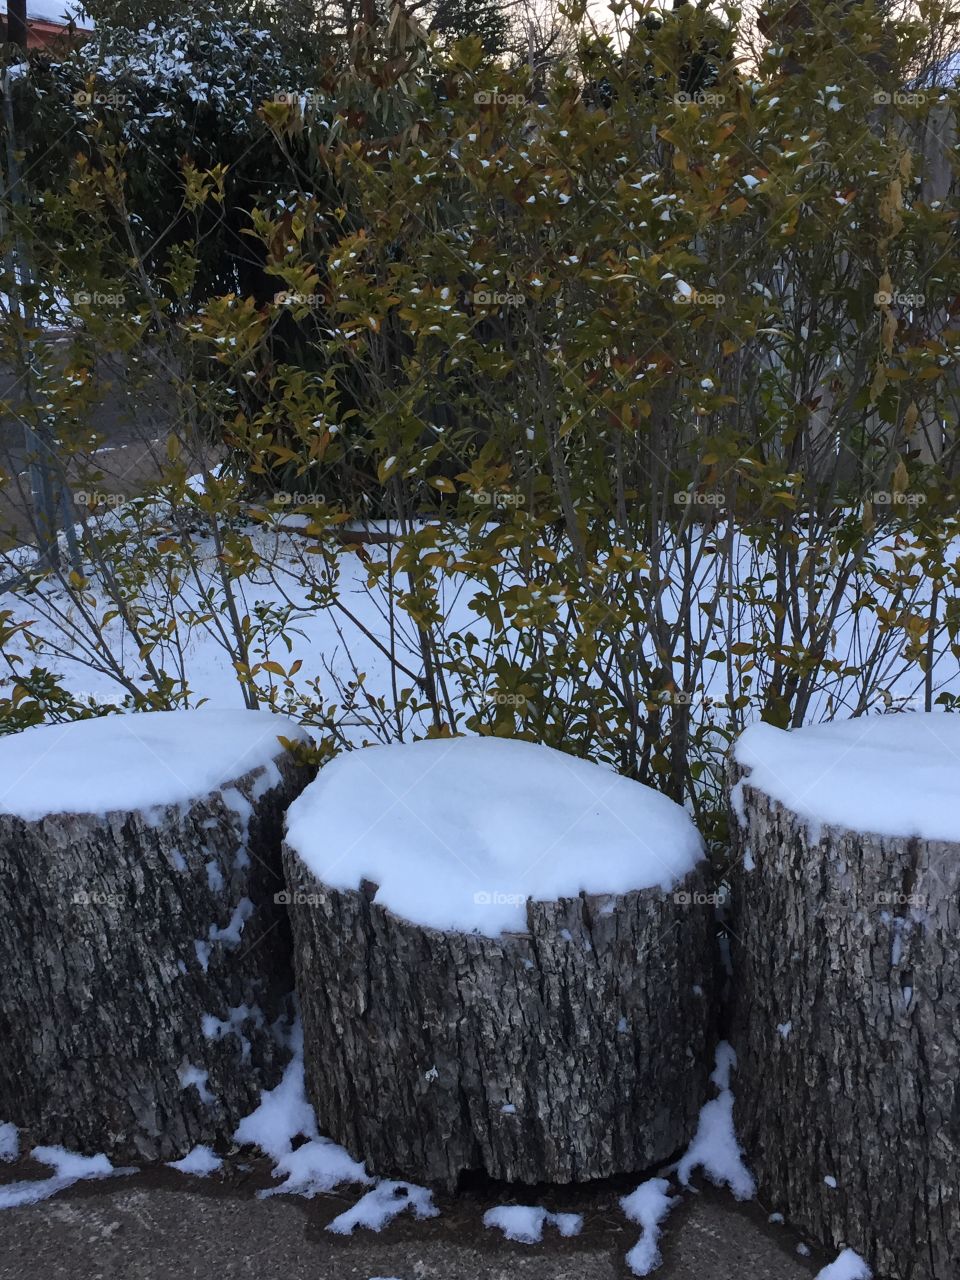 Tree trunks with snow on them